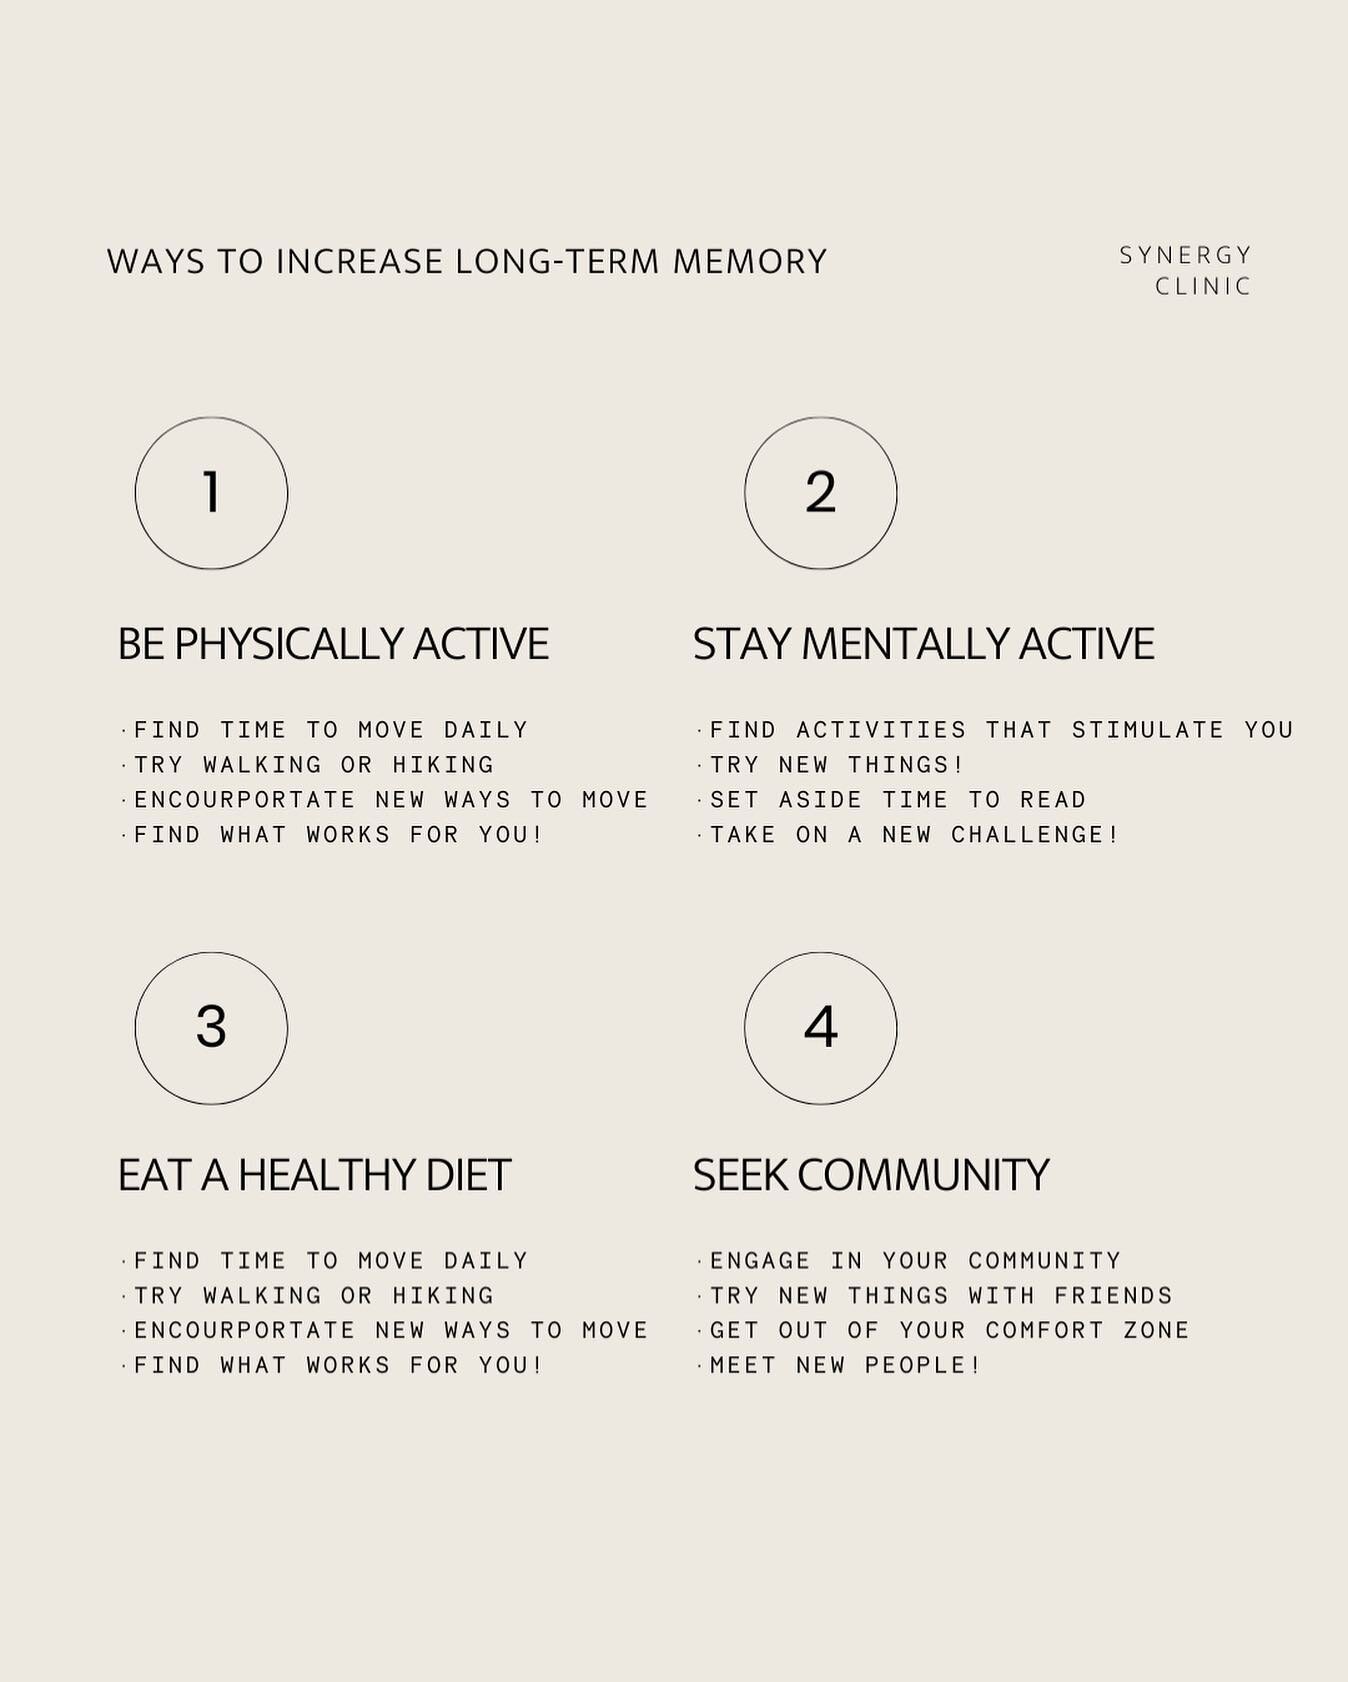 Ways to increase long term memory 🧠 it&rsquo;s important we take the time to be mindful of creating healthy habits throughout our life to ensure our brain health for the rest of our lives. 💡 

See if you can take the time to try any of these practi